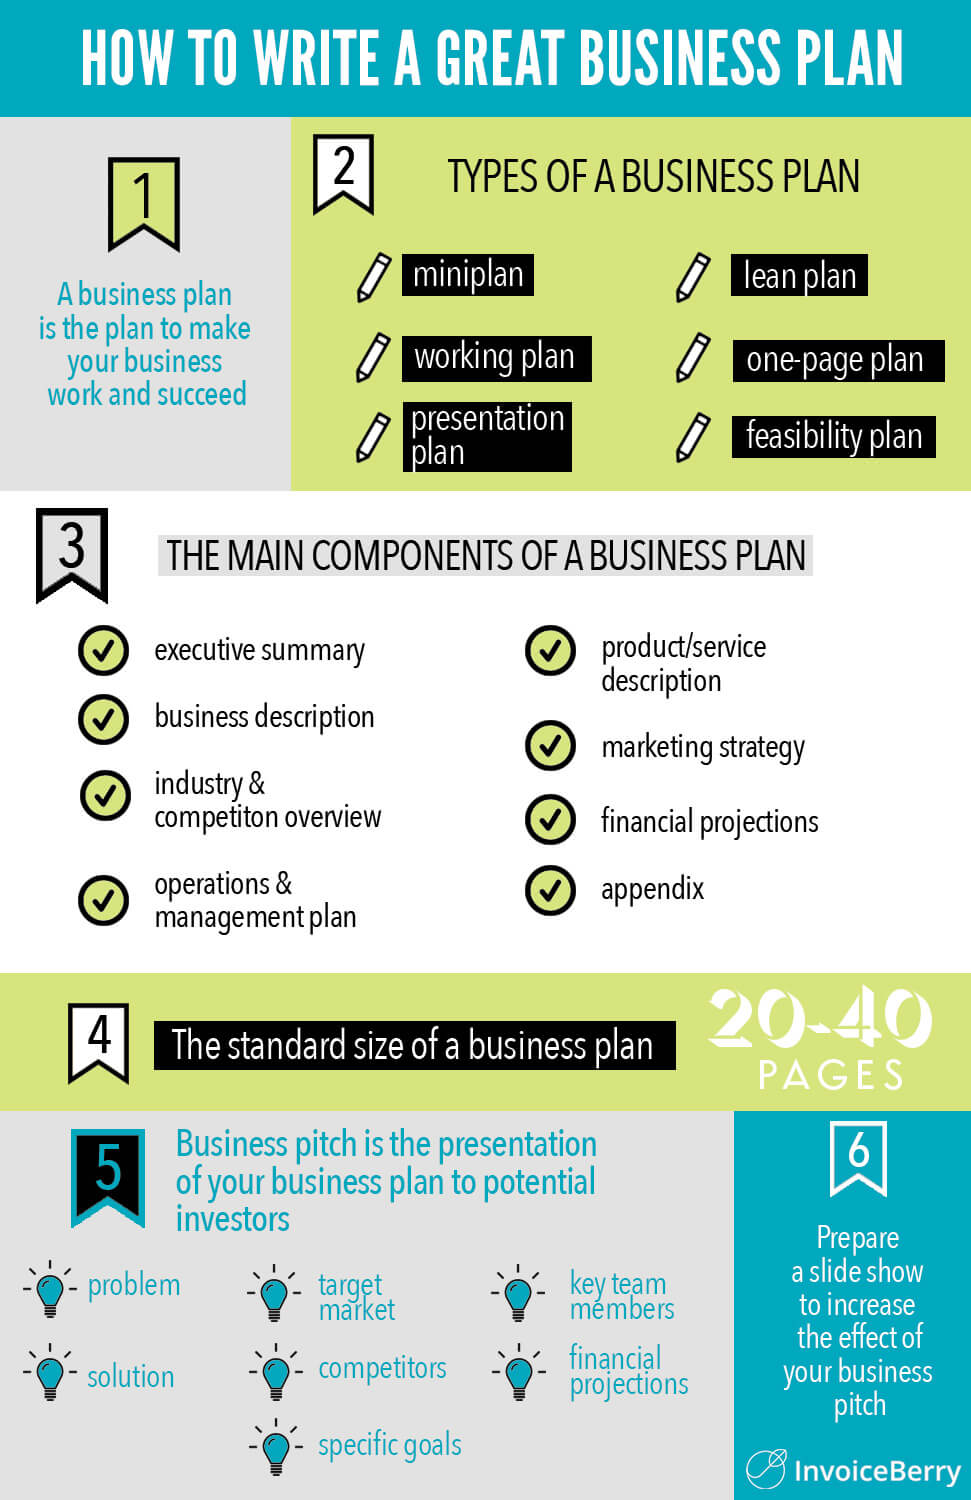 Where to write the conclusion of your business plan?